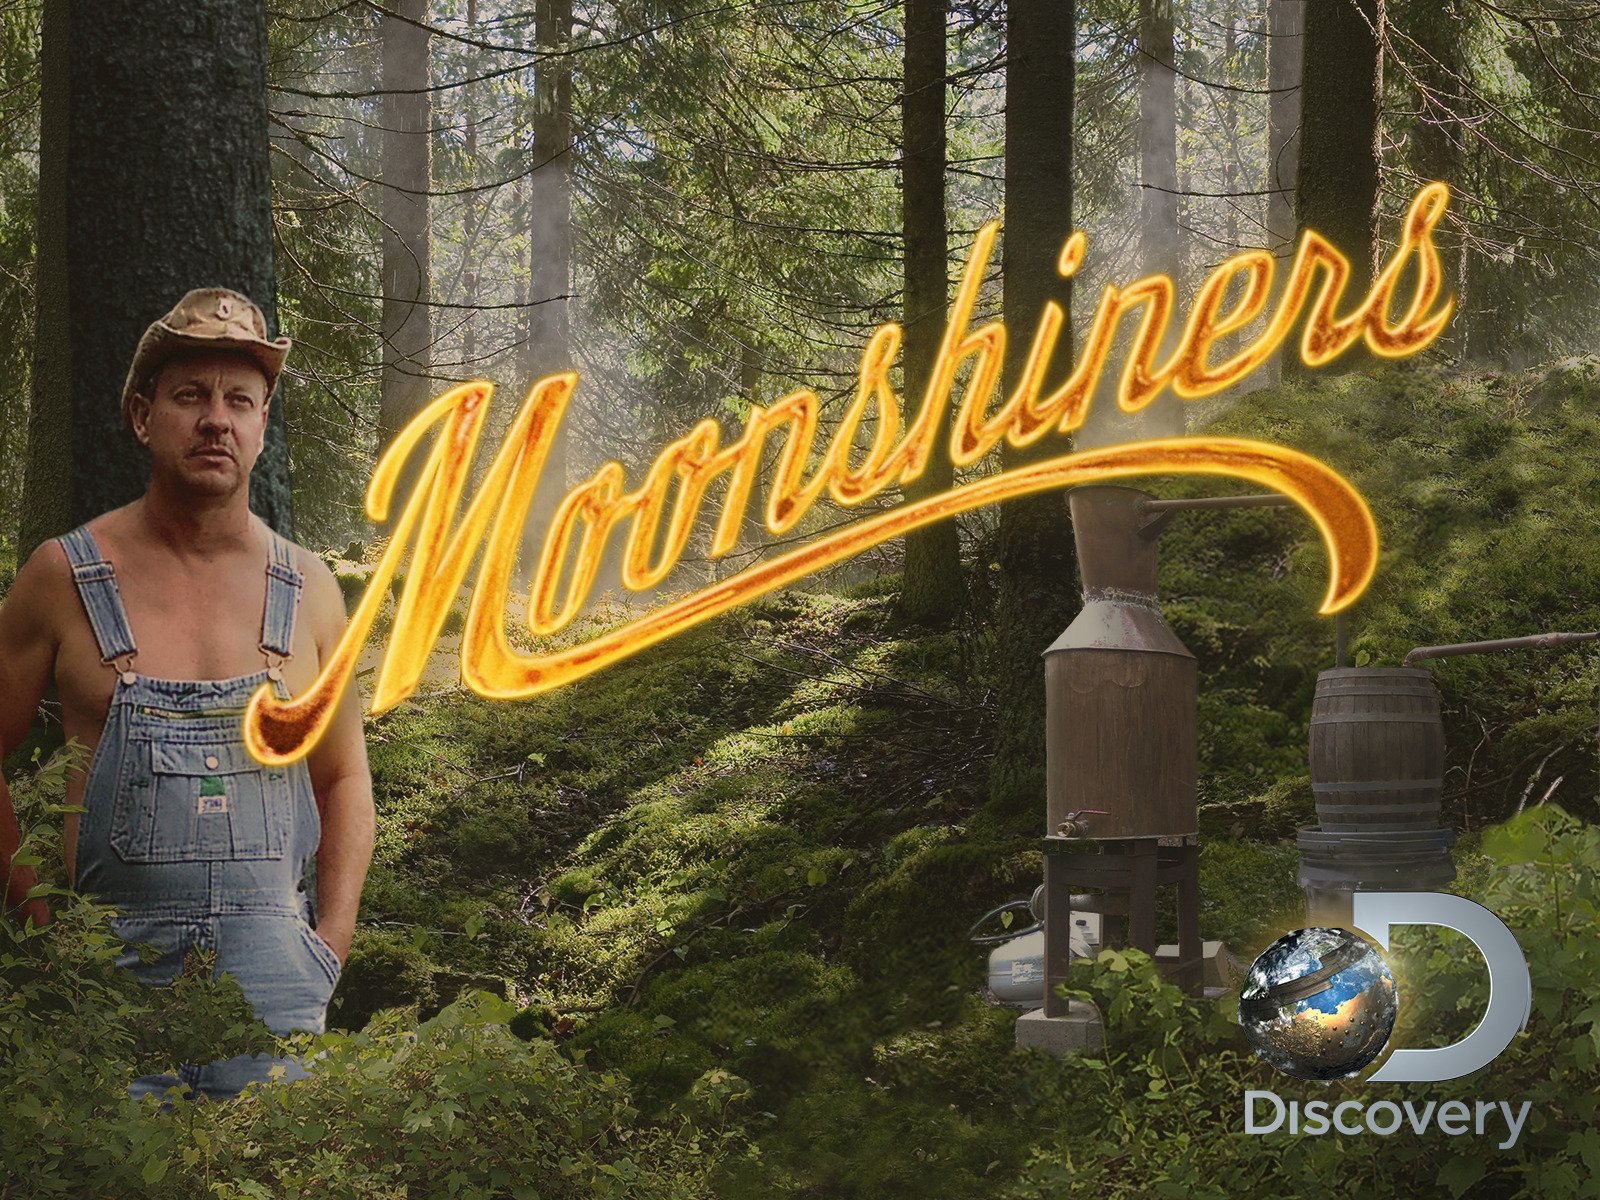 Facts You Didn’t Know About Moonshiners